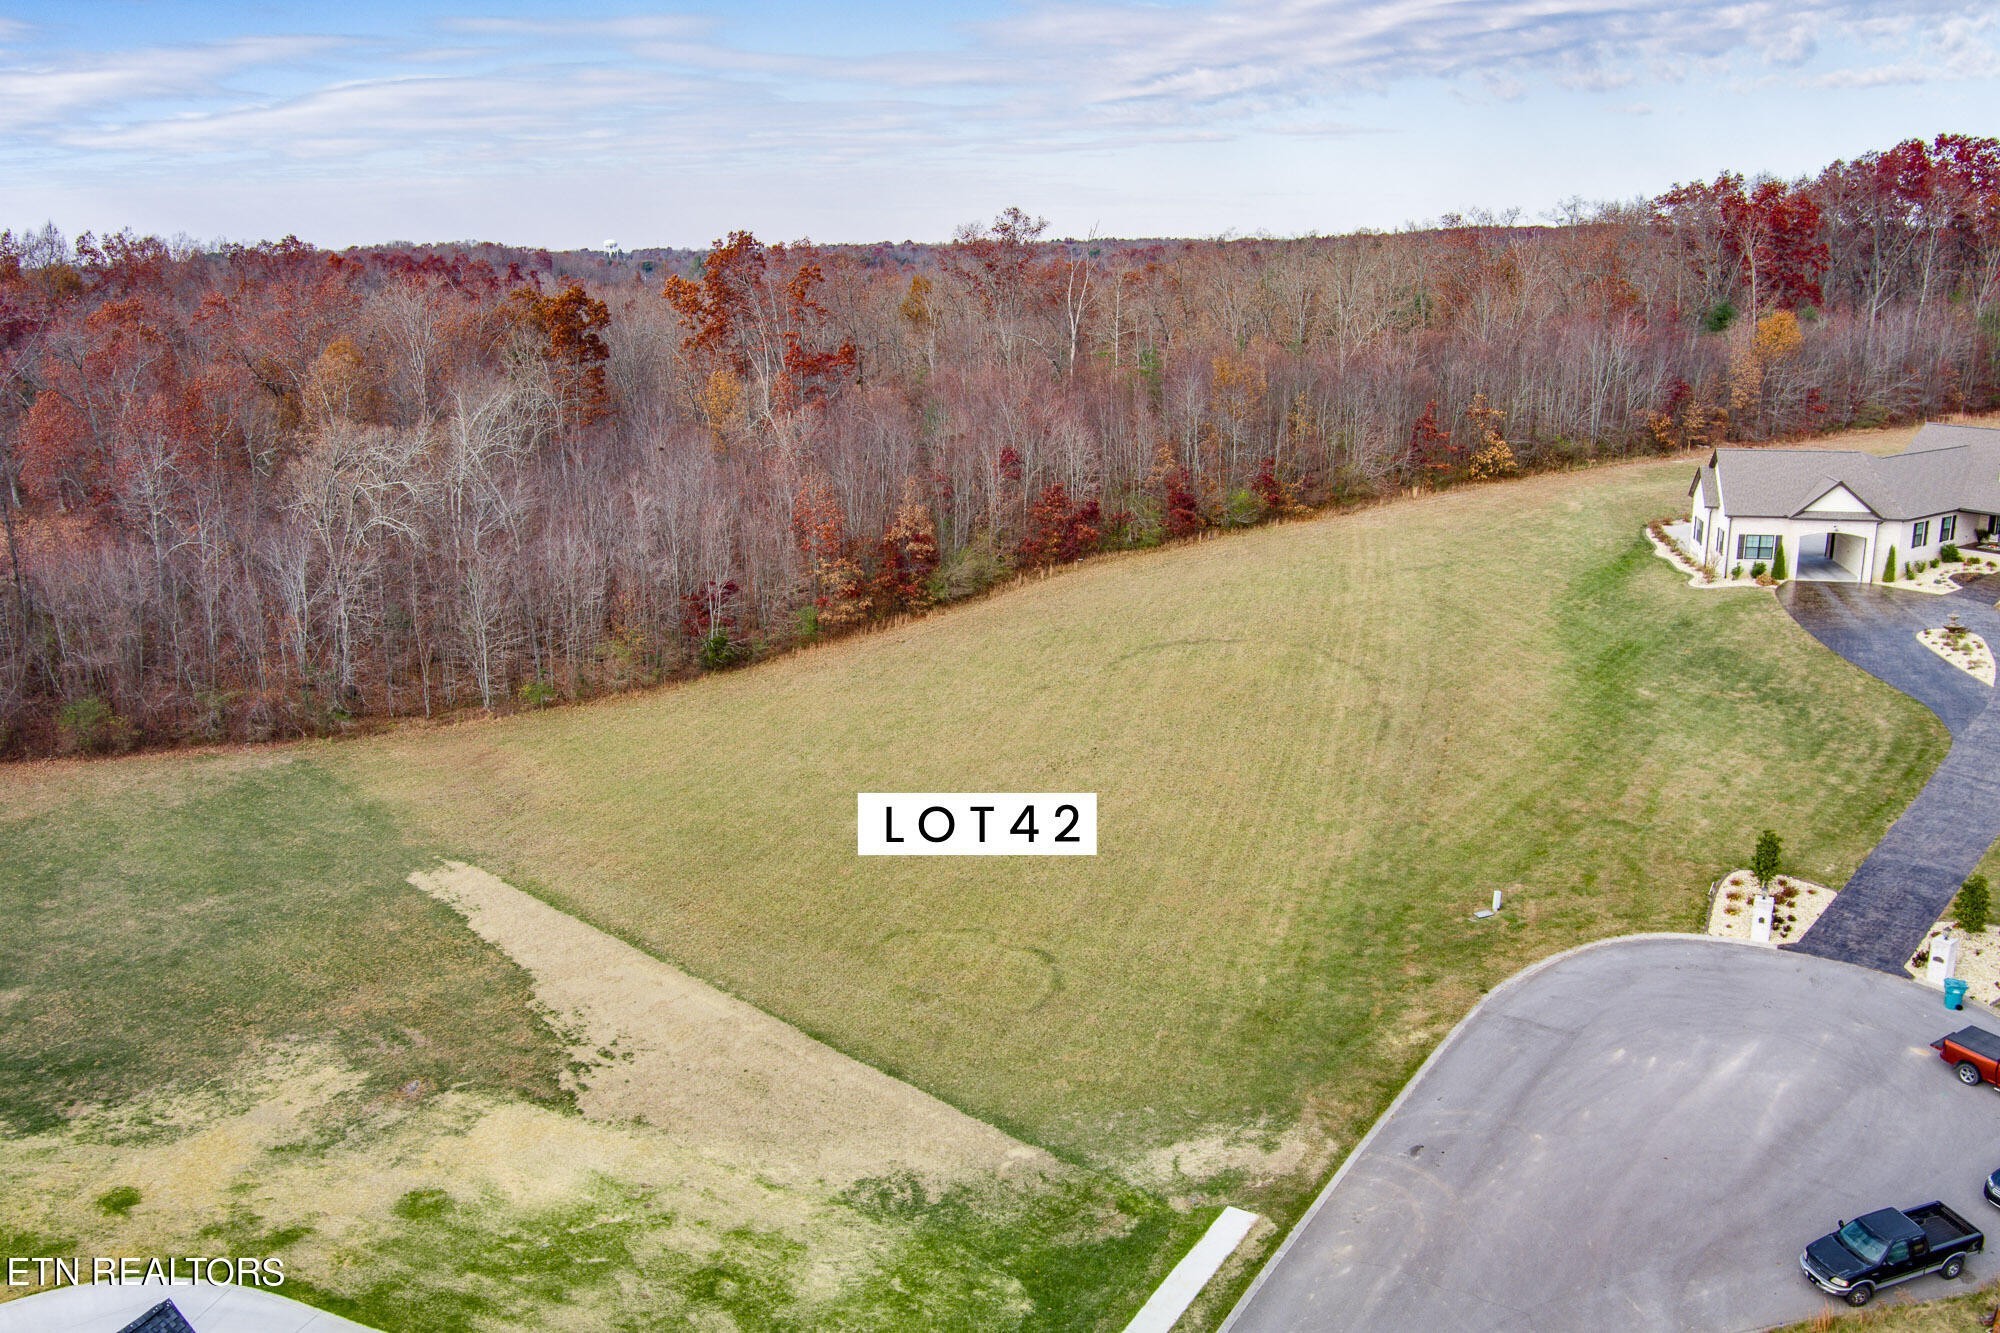 1. Lot 42 Sycamore Rd